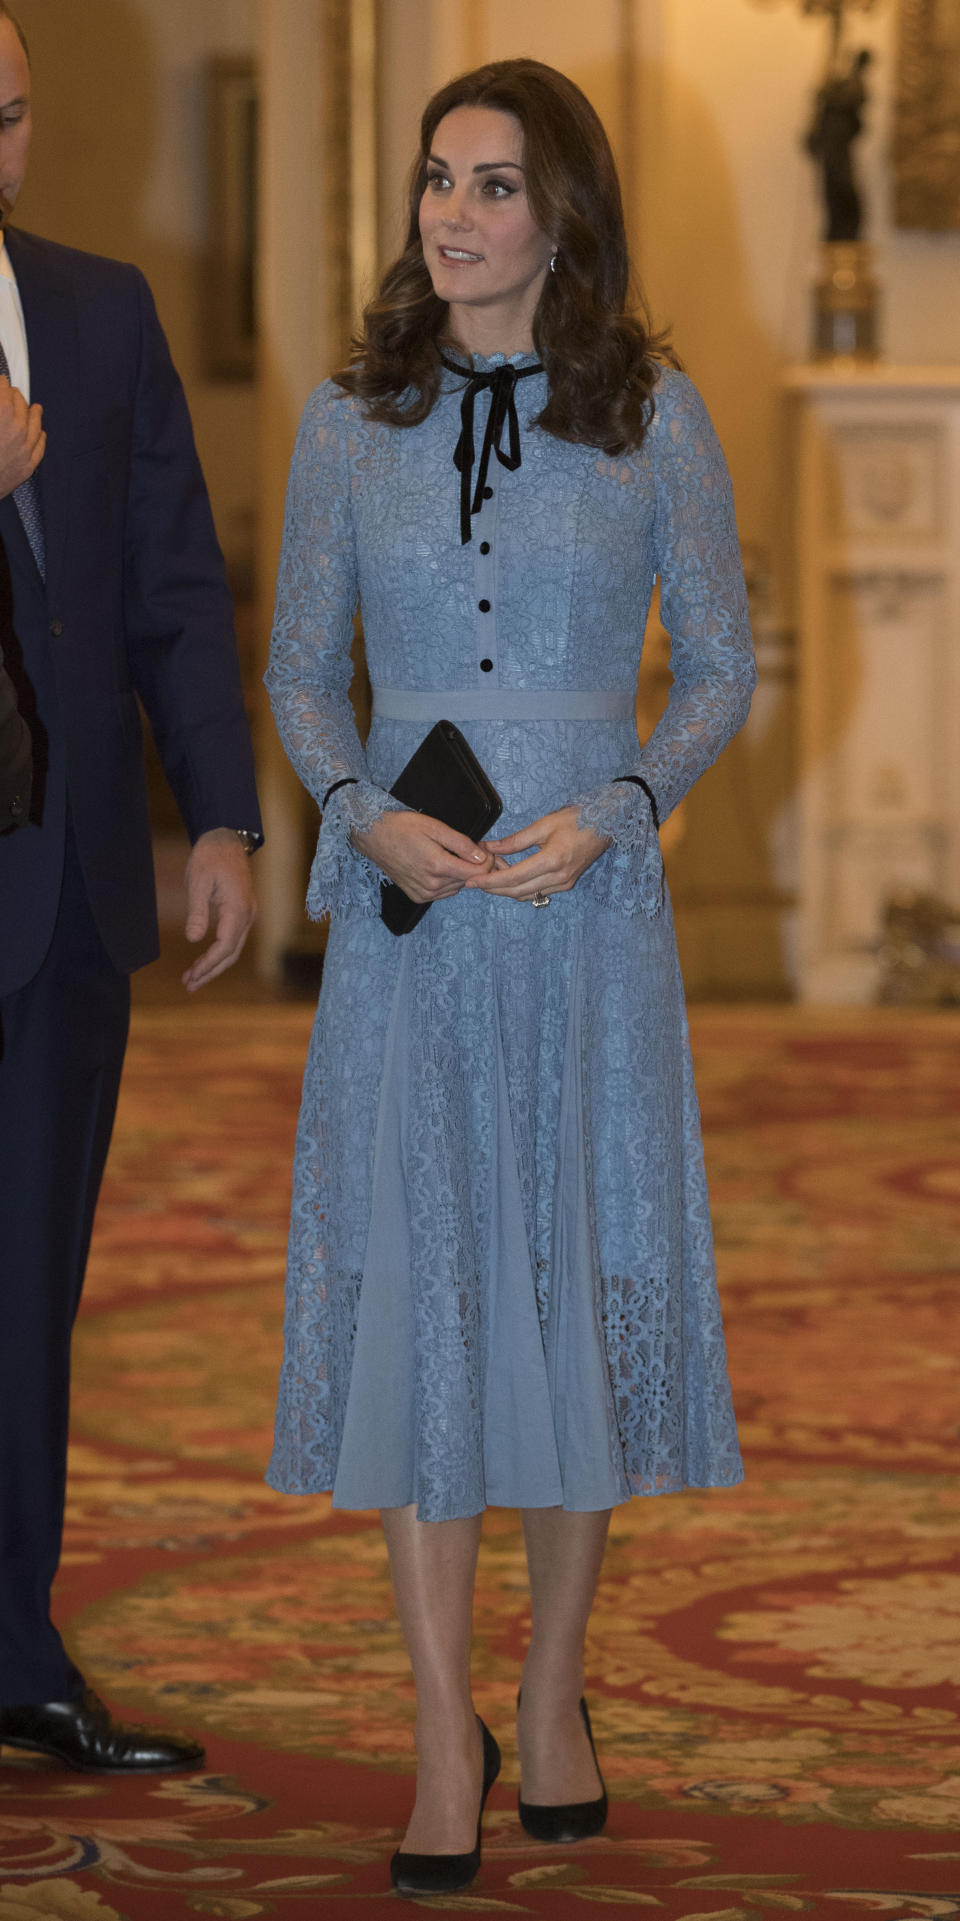 Kate’s tiny baby bump was just visible in a powder blue dress by Temperley London [Photo: PA]